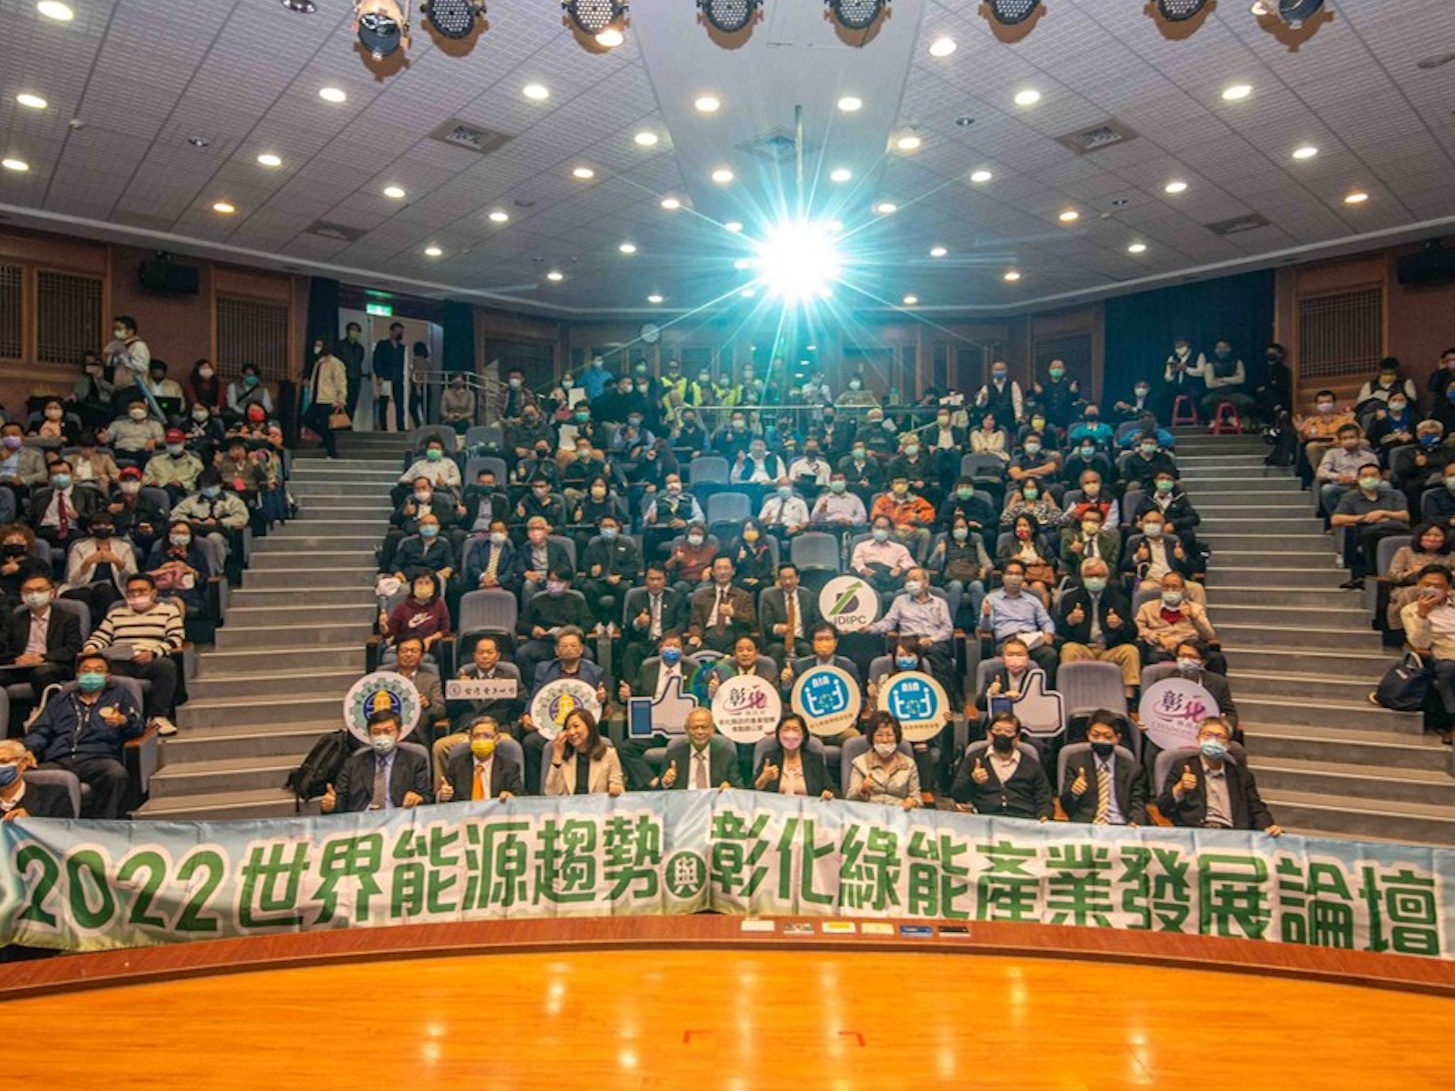 MRE shared its PV project experience at the Changhua Green Energy Forum 2022